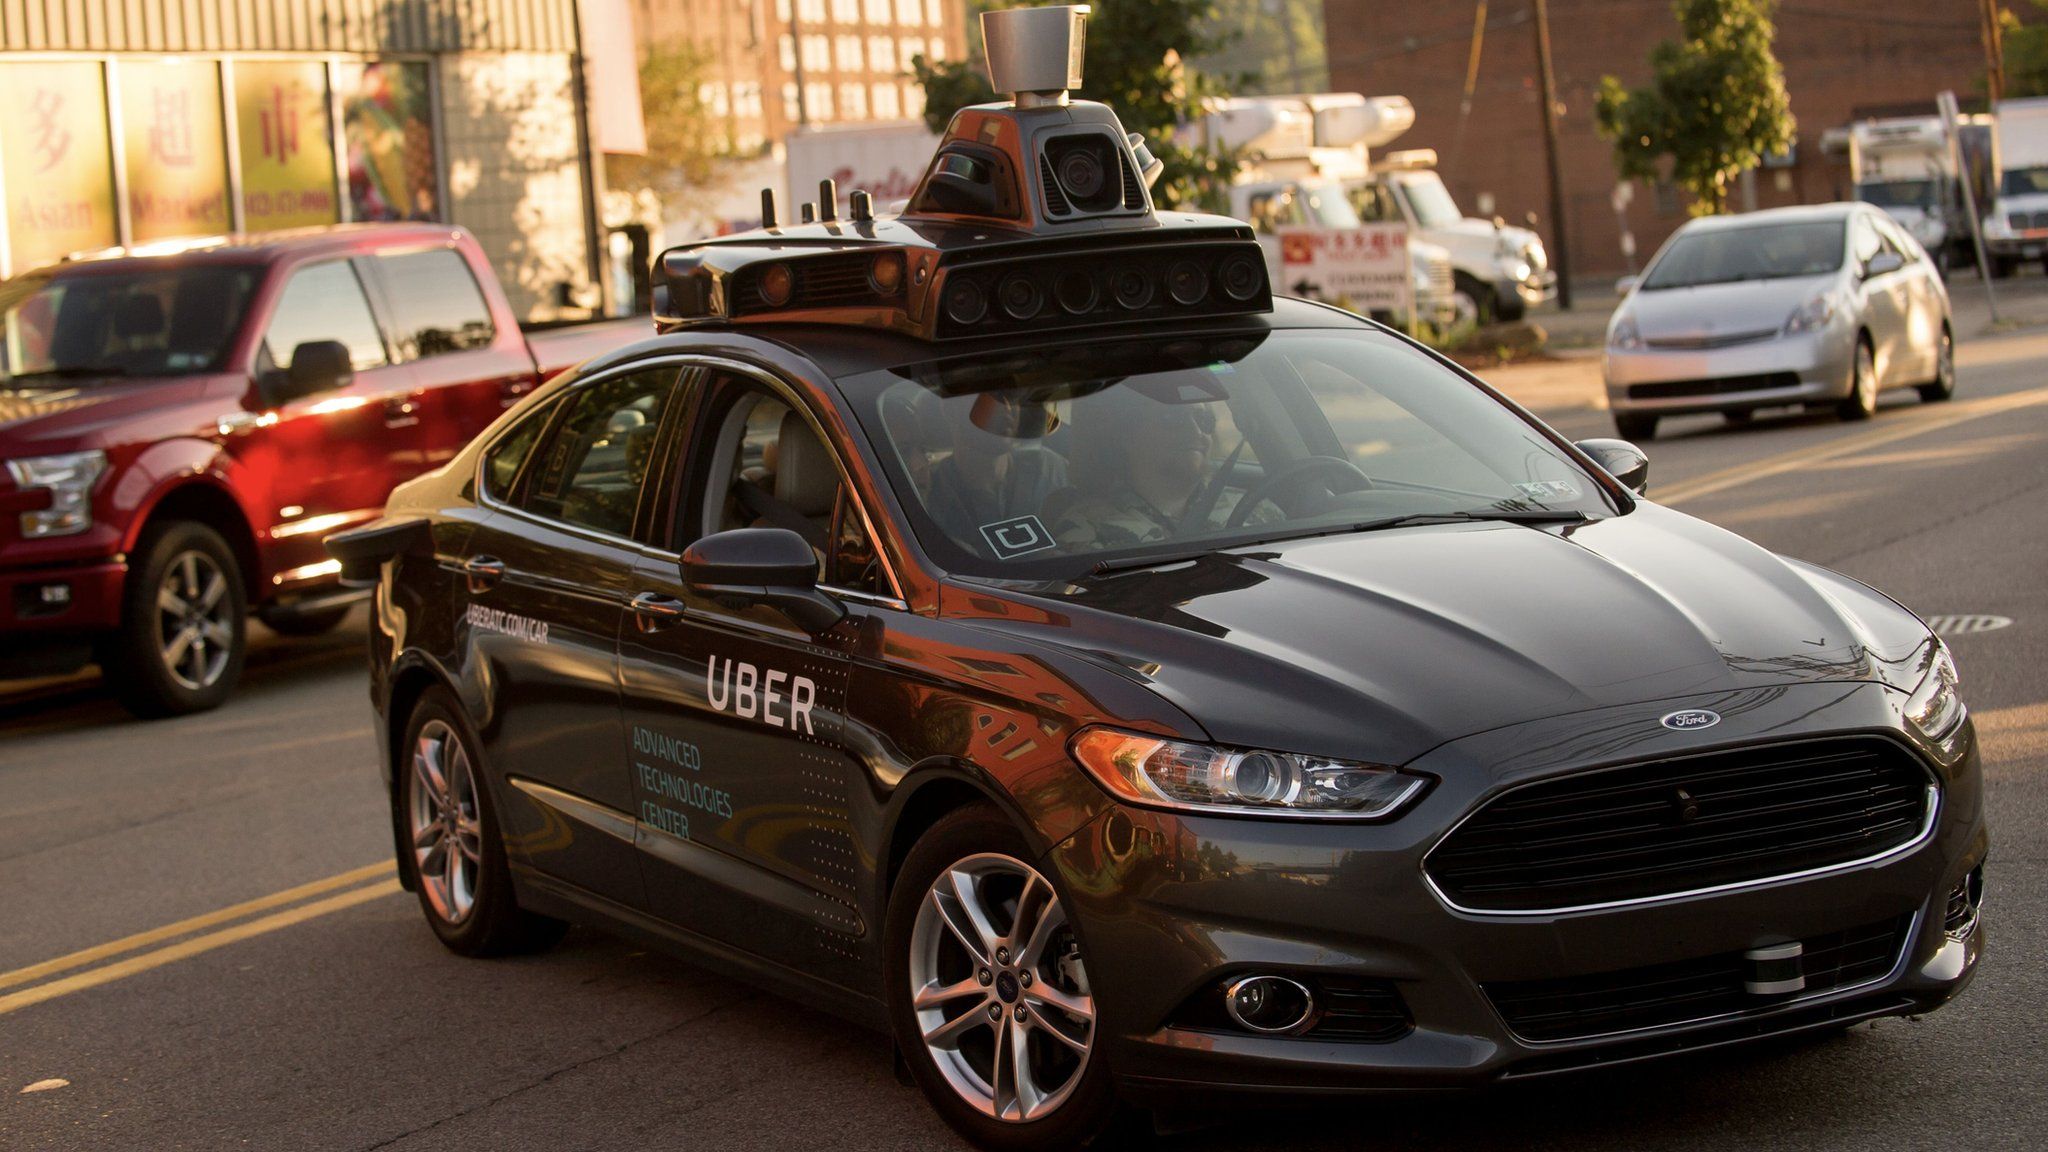 Uber said the cars on US roads used third-party LiDAR tech